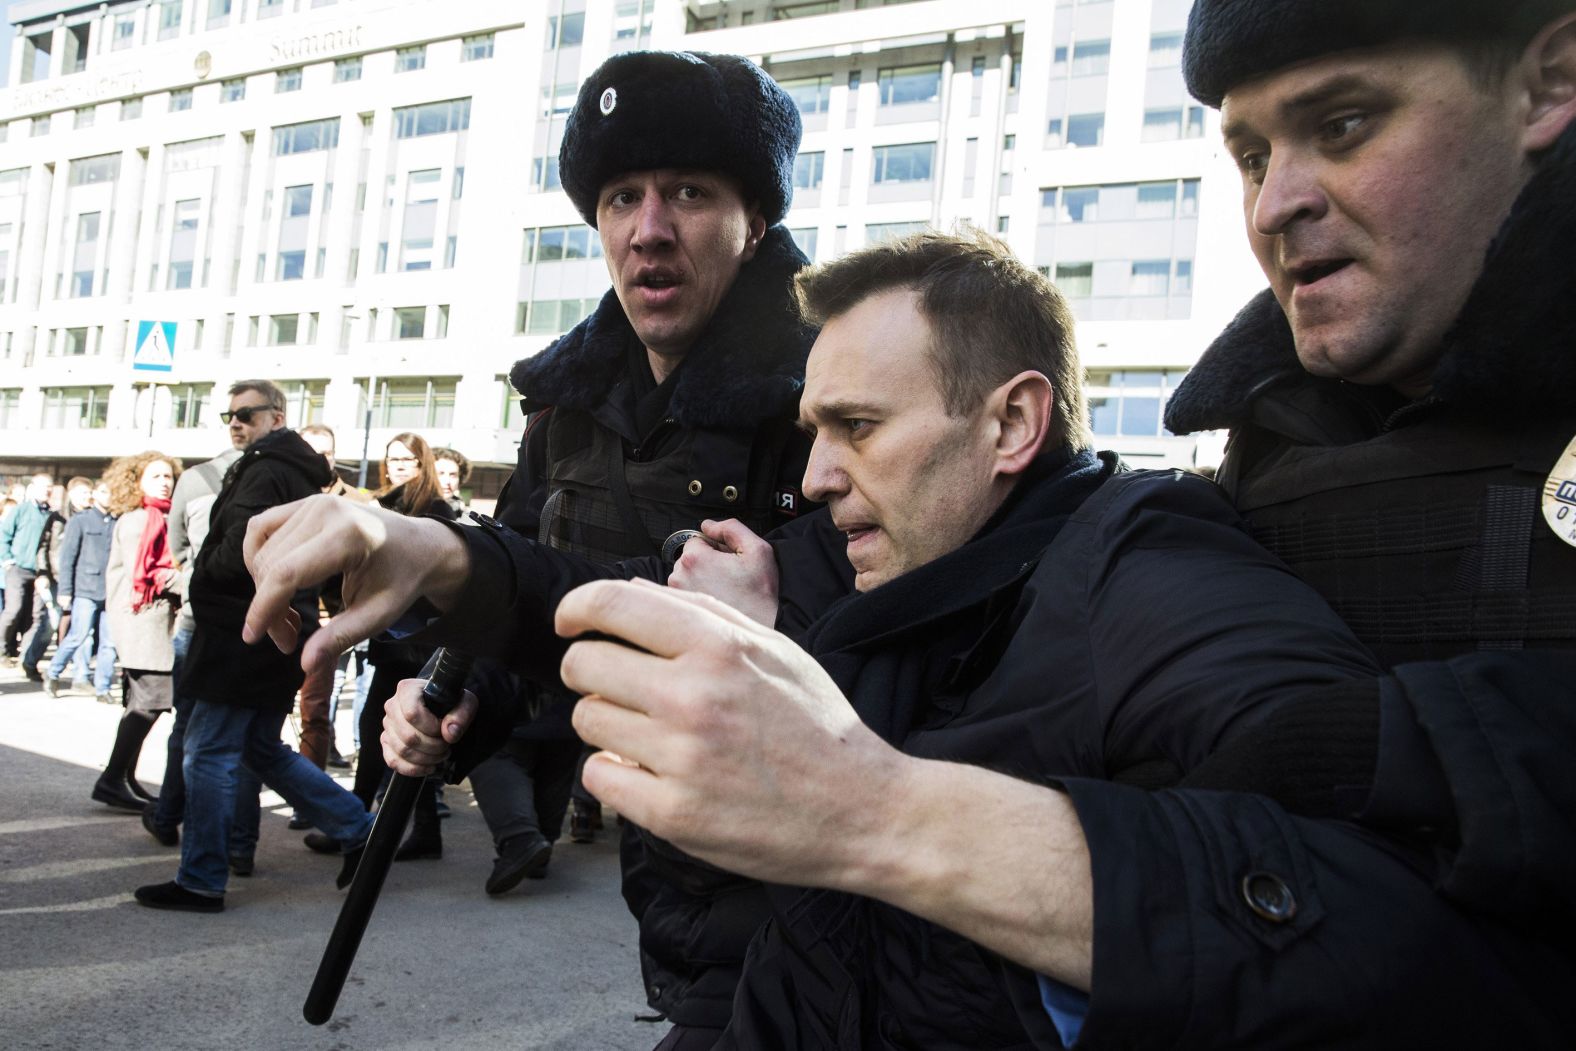 Police detain Navalny during an opposition rally in Moscow in March 2017.